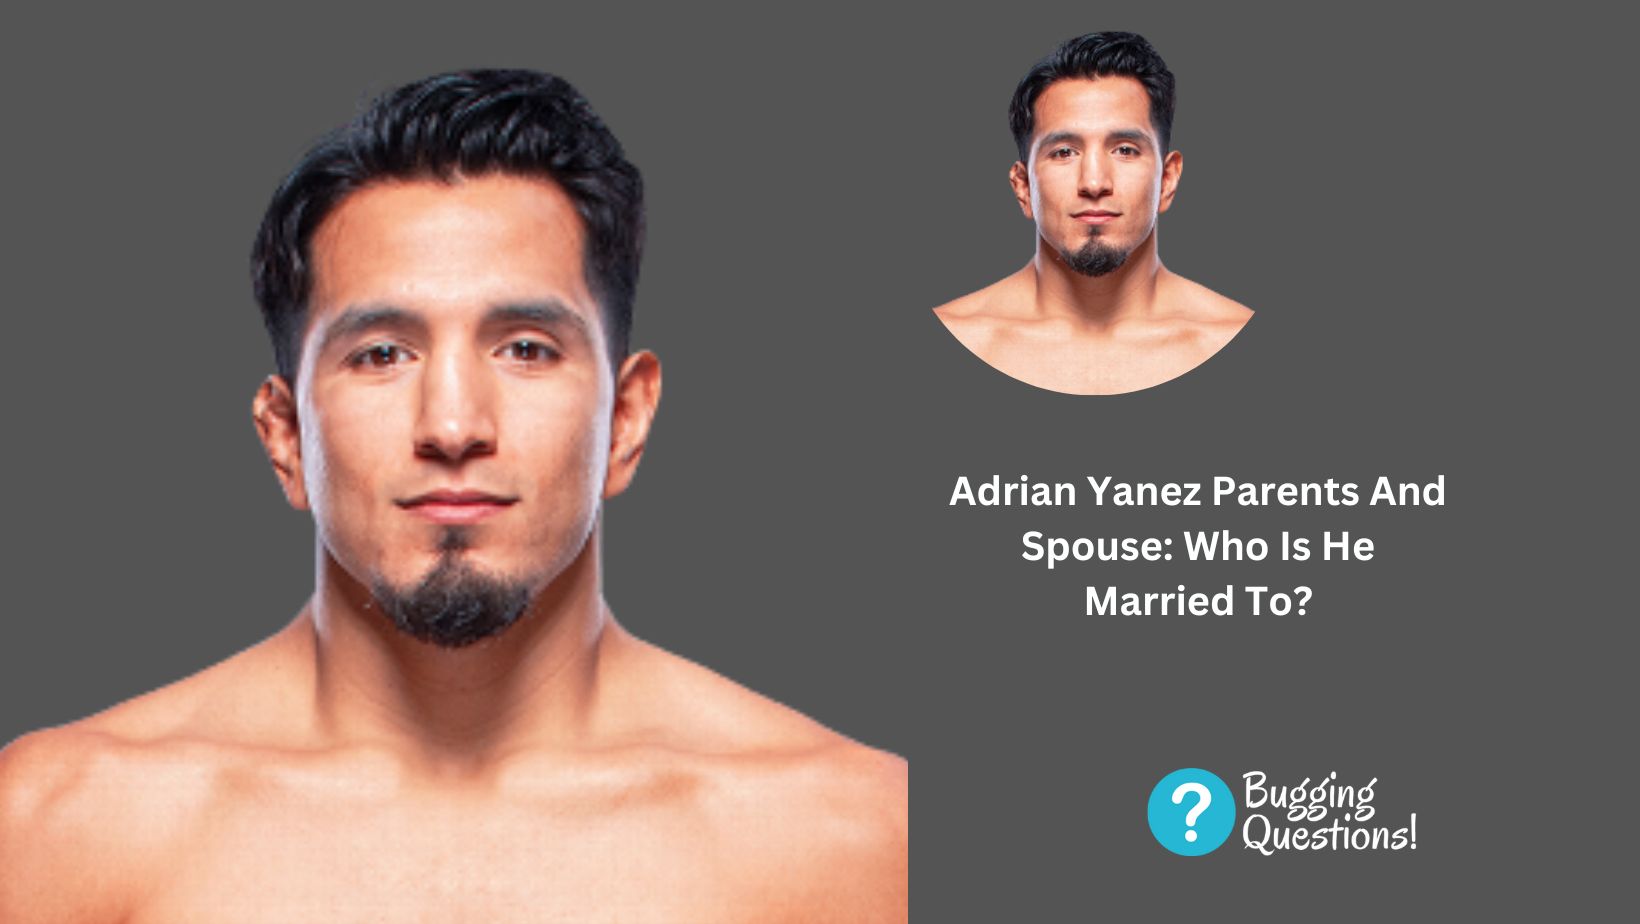 Adrian Yanez Parents And Spouse: Who Is He Married To?